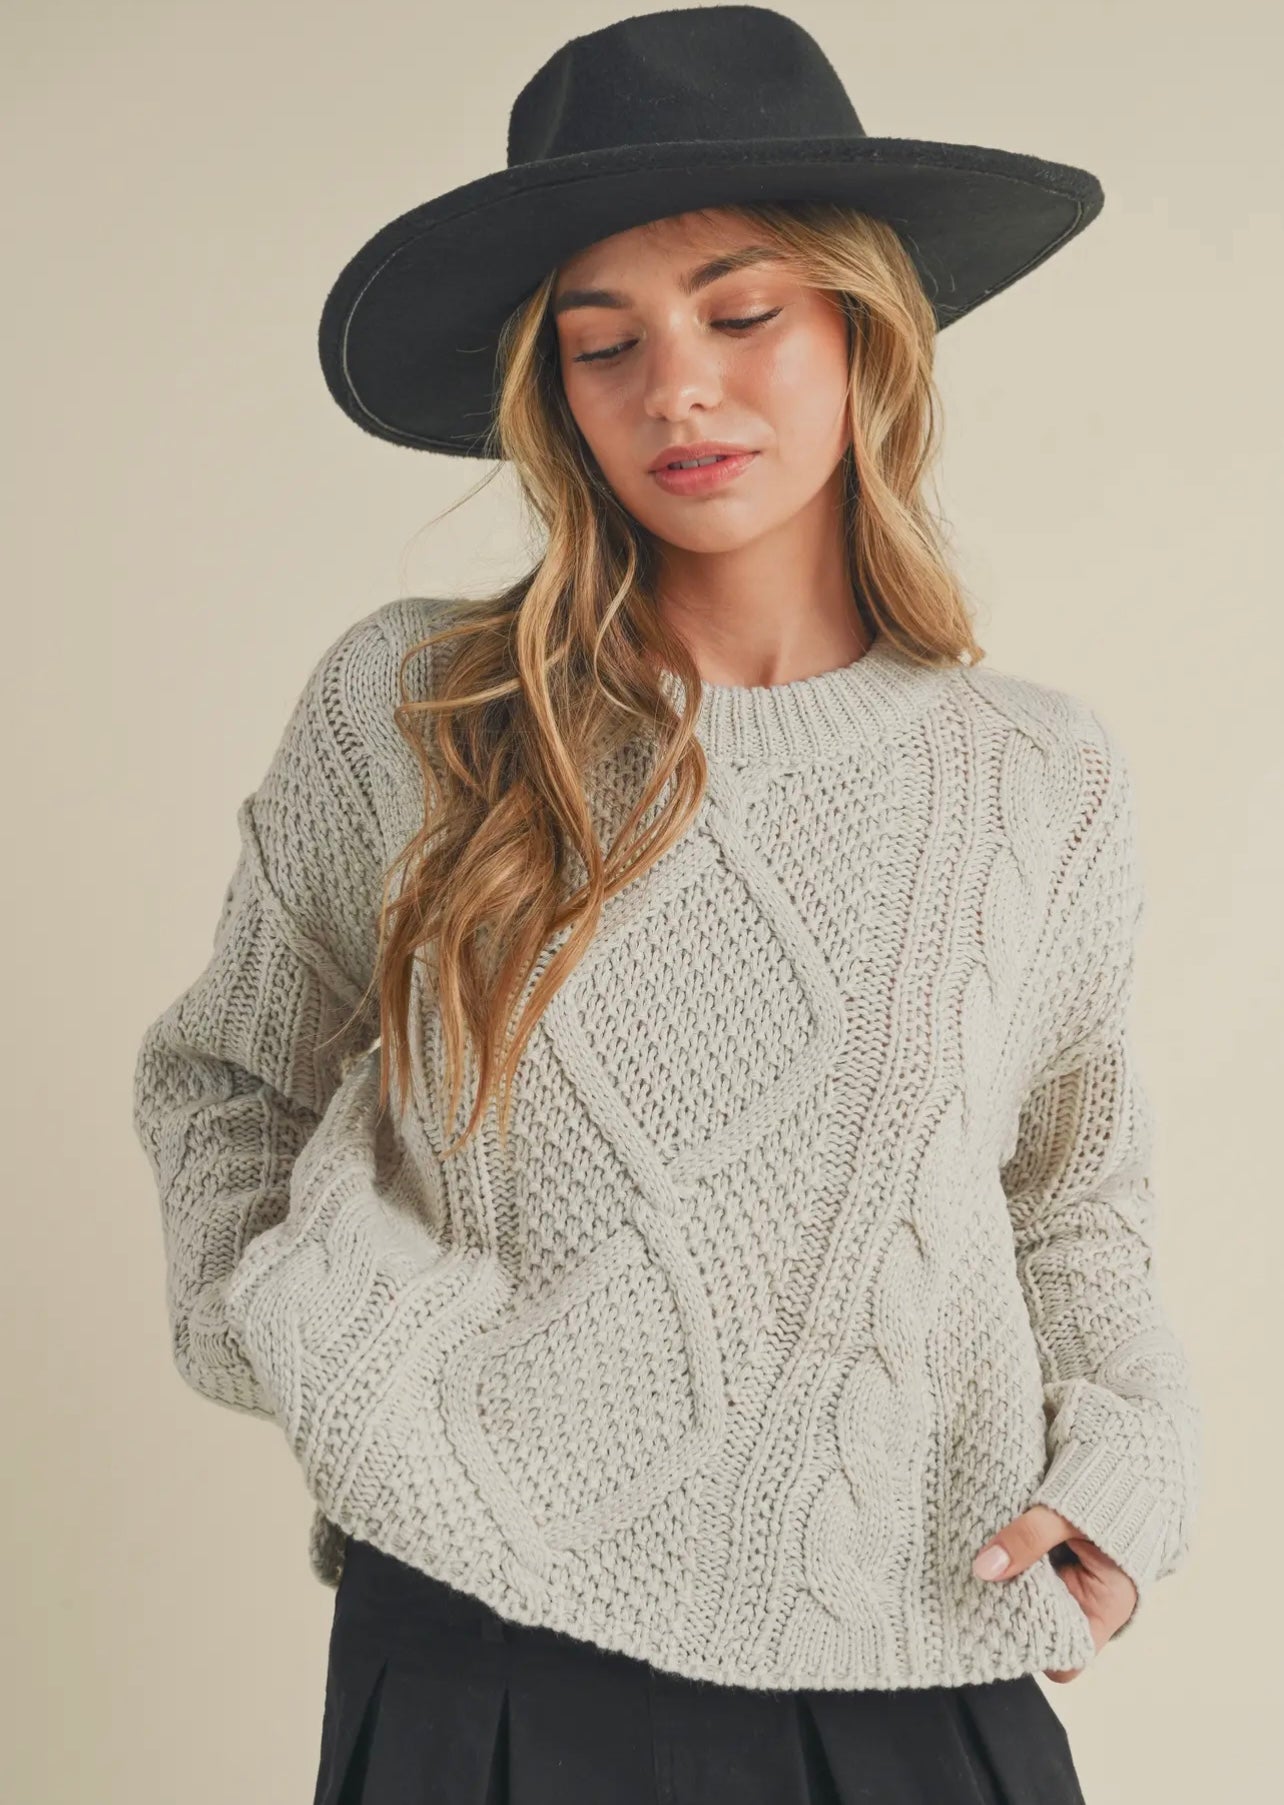 In the details sweater